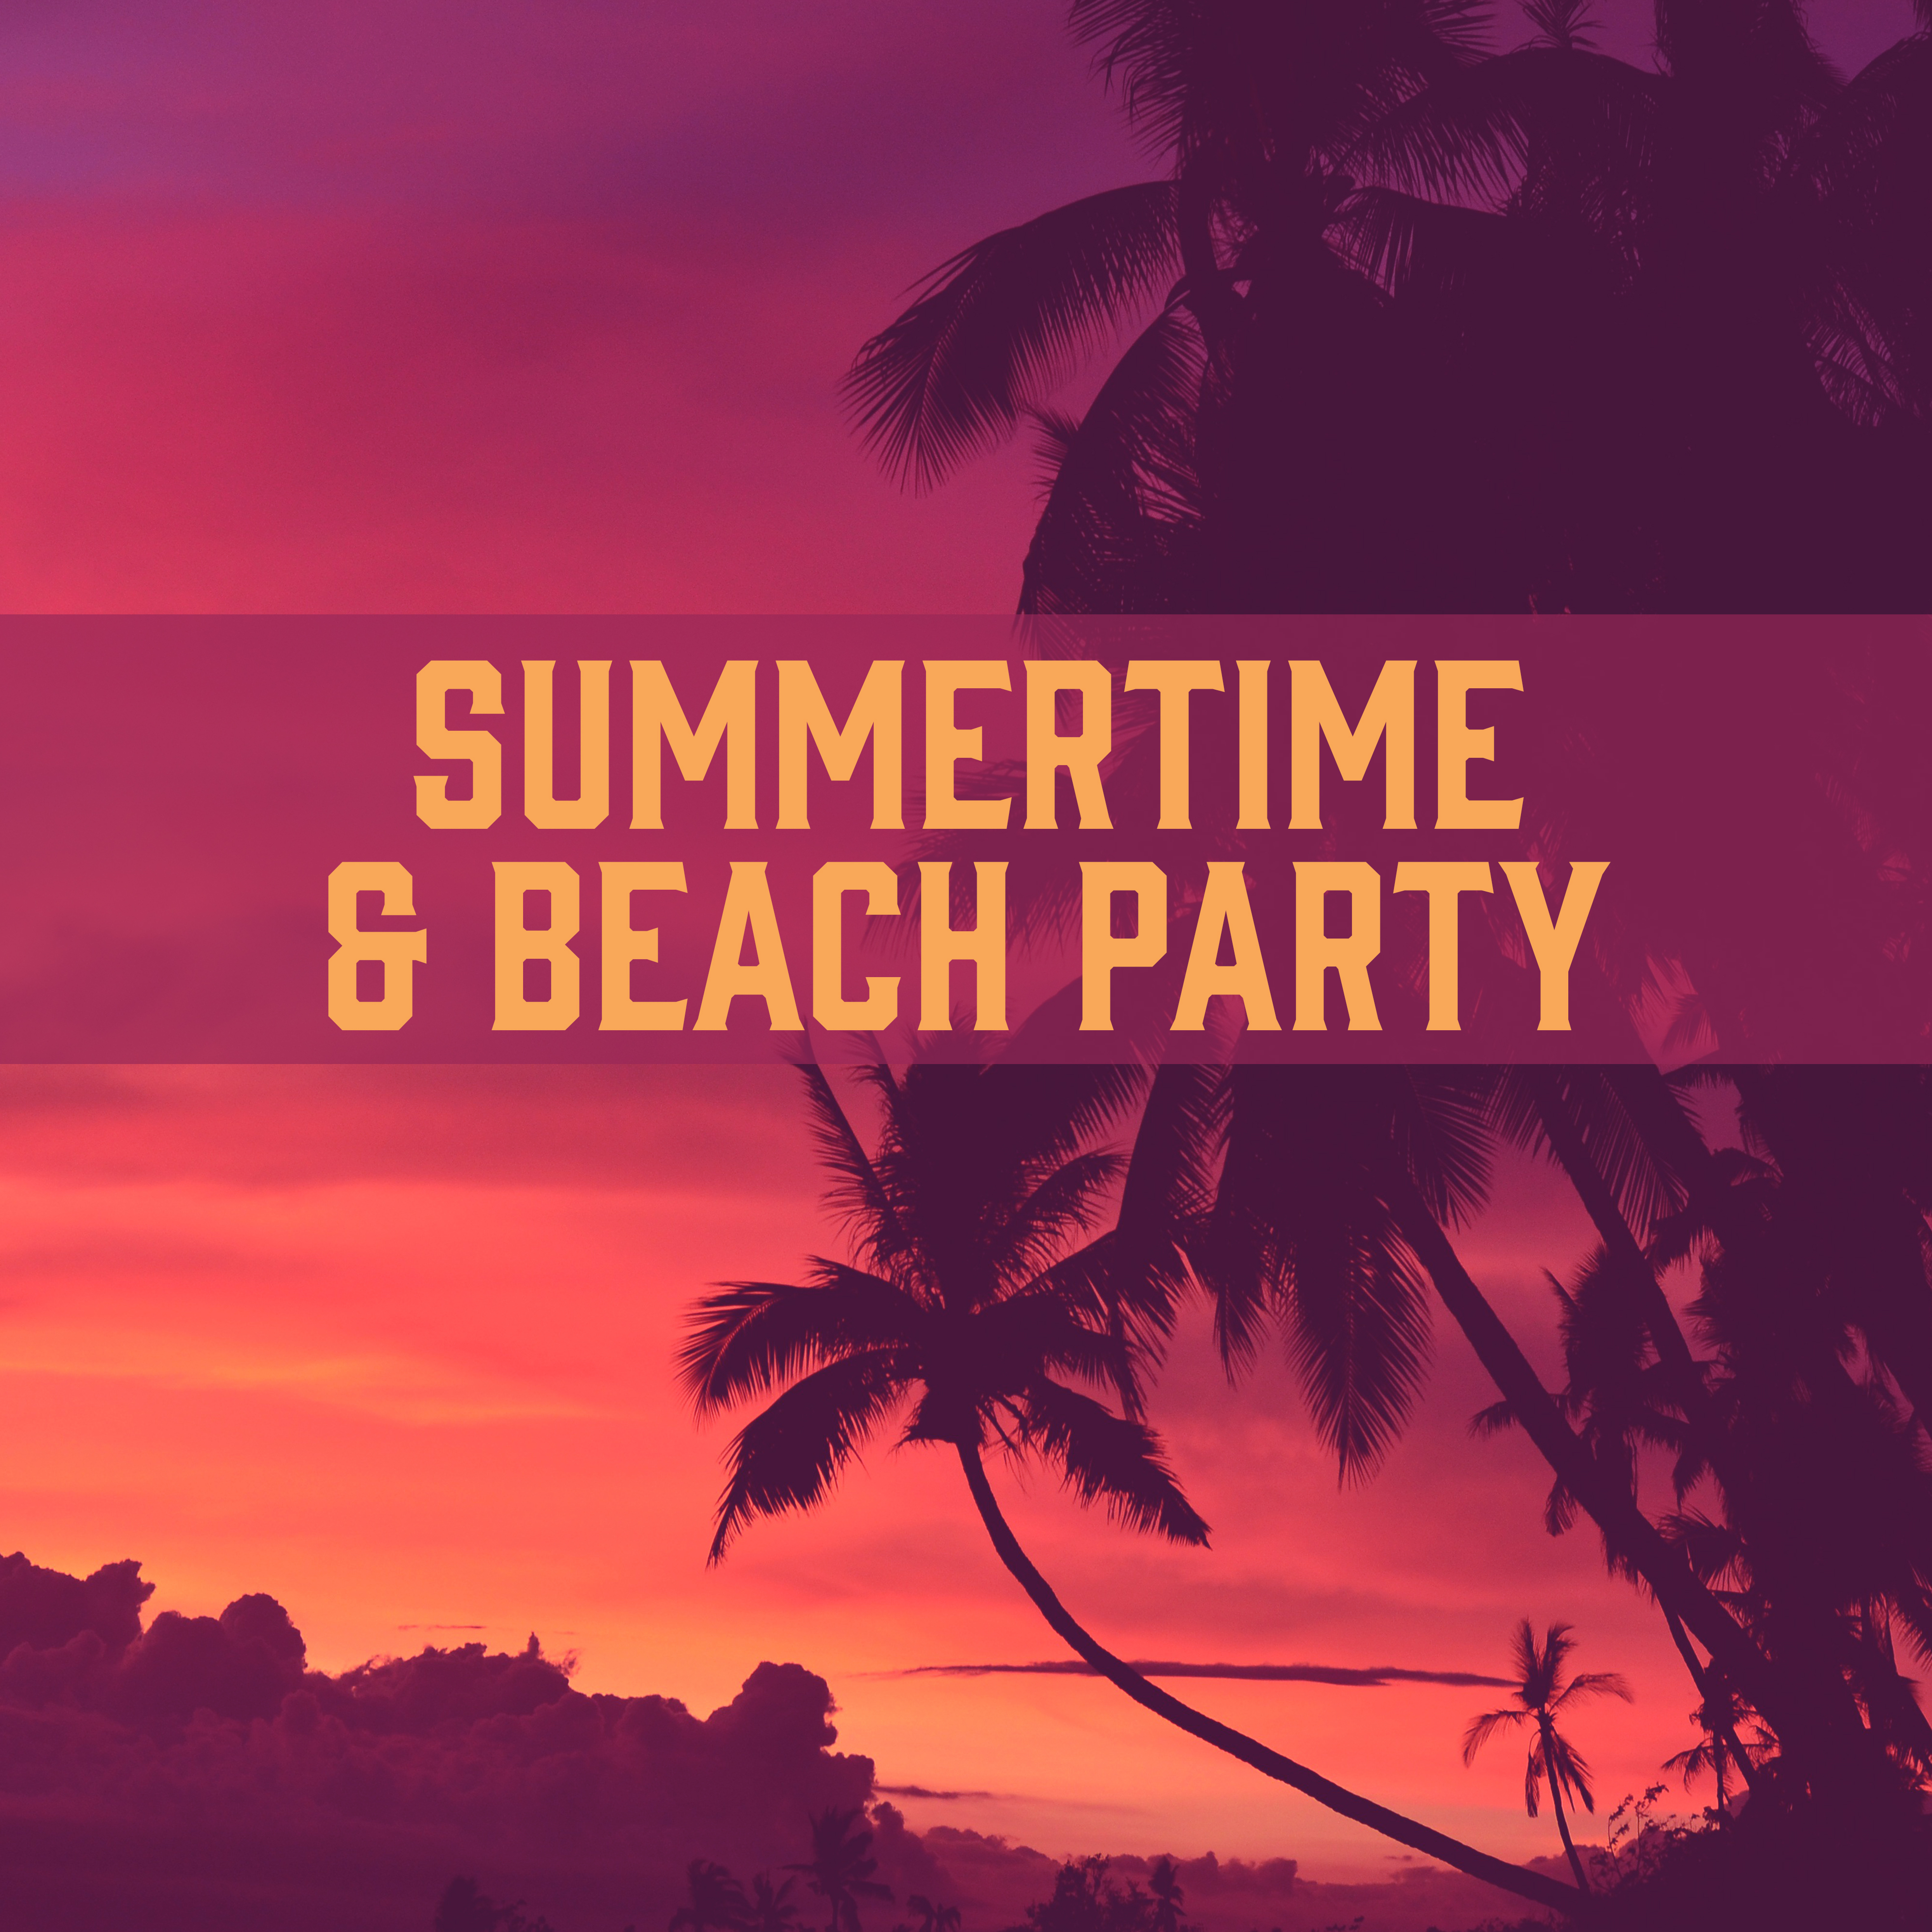 Summertime  Beach Party  Chillout Sounds, Hot Holiday, Party Night, Crazy Music, Good Energy